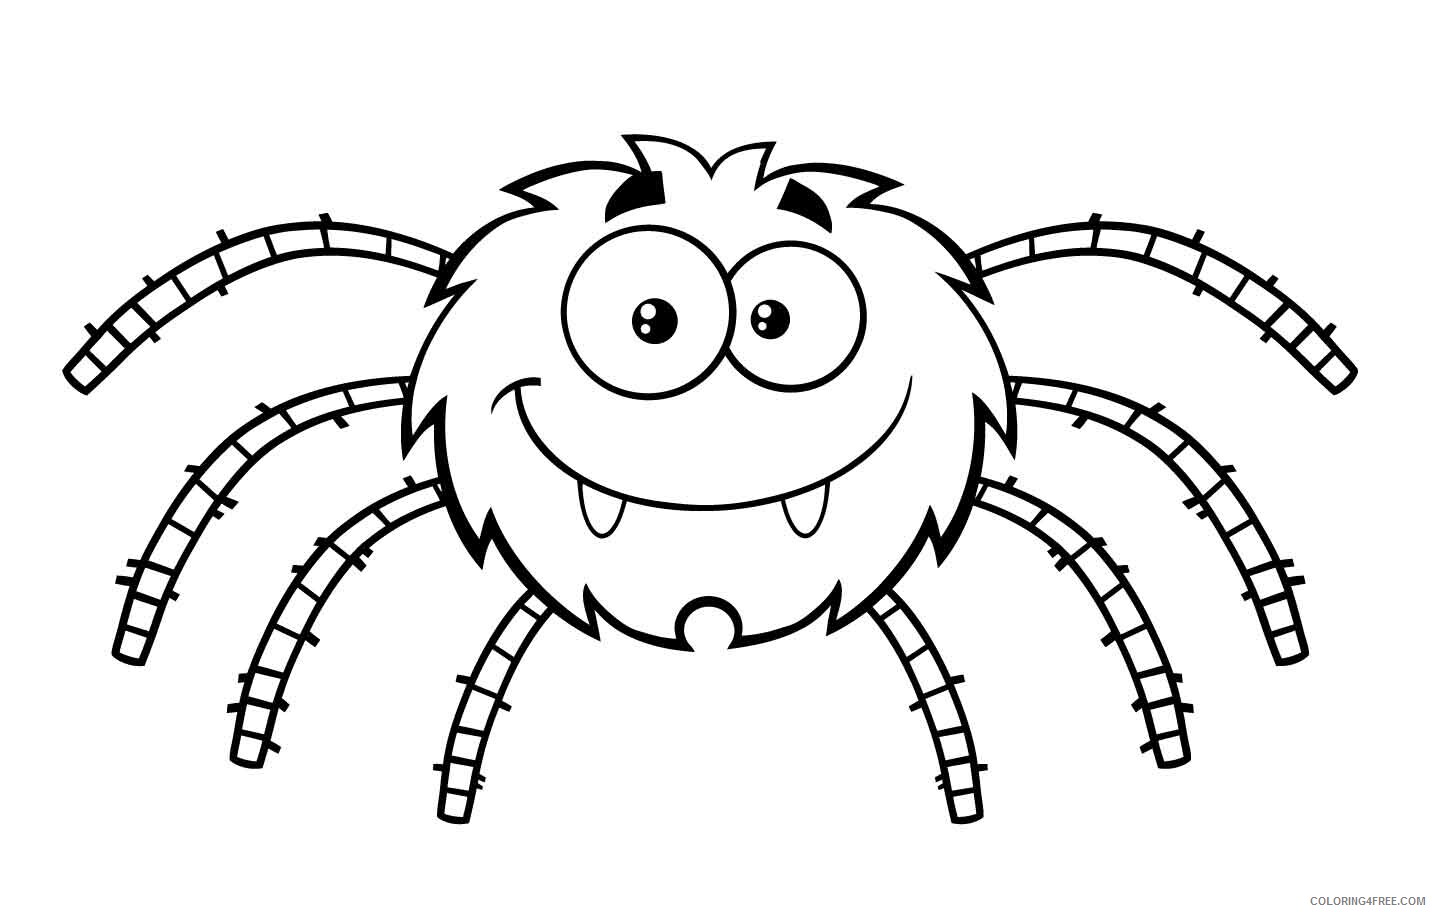 Spider Coloring Pages Animal Printable Sheets Cute Spider 2021 4619 Coloring4free